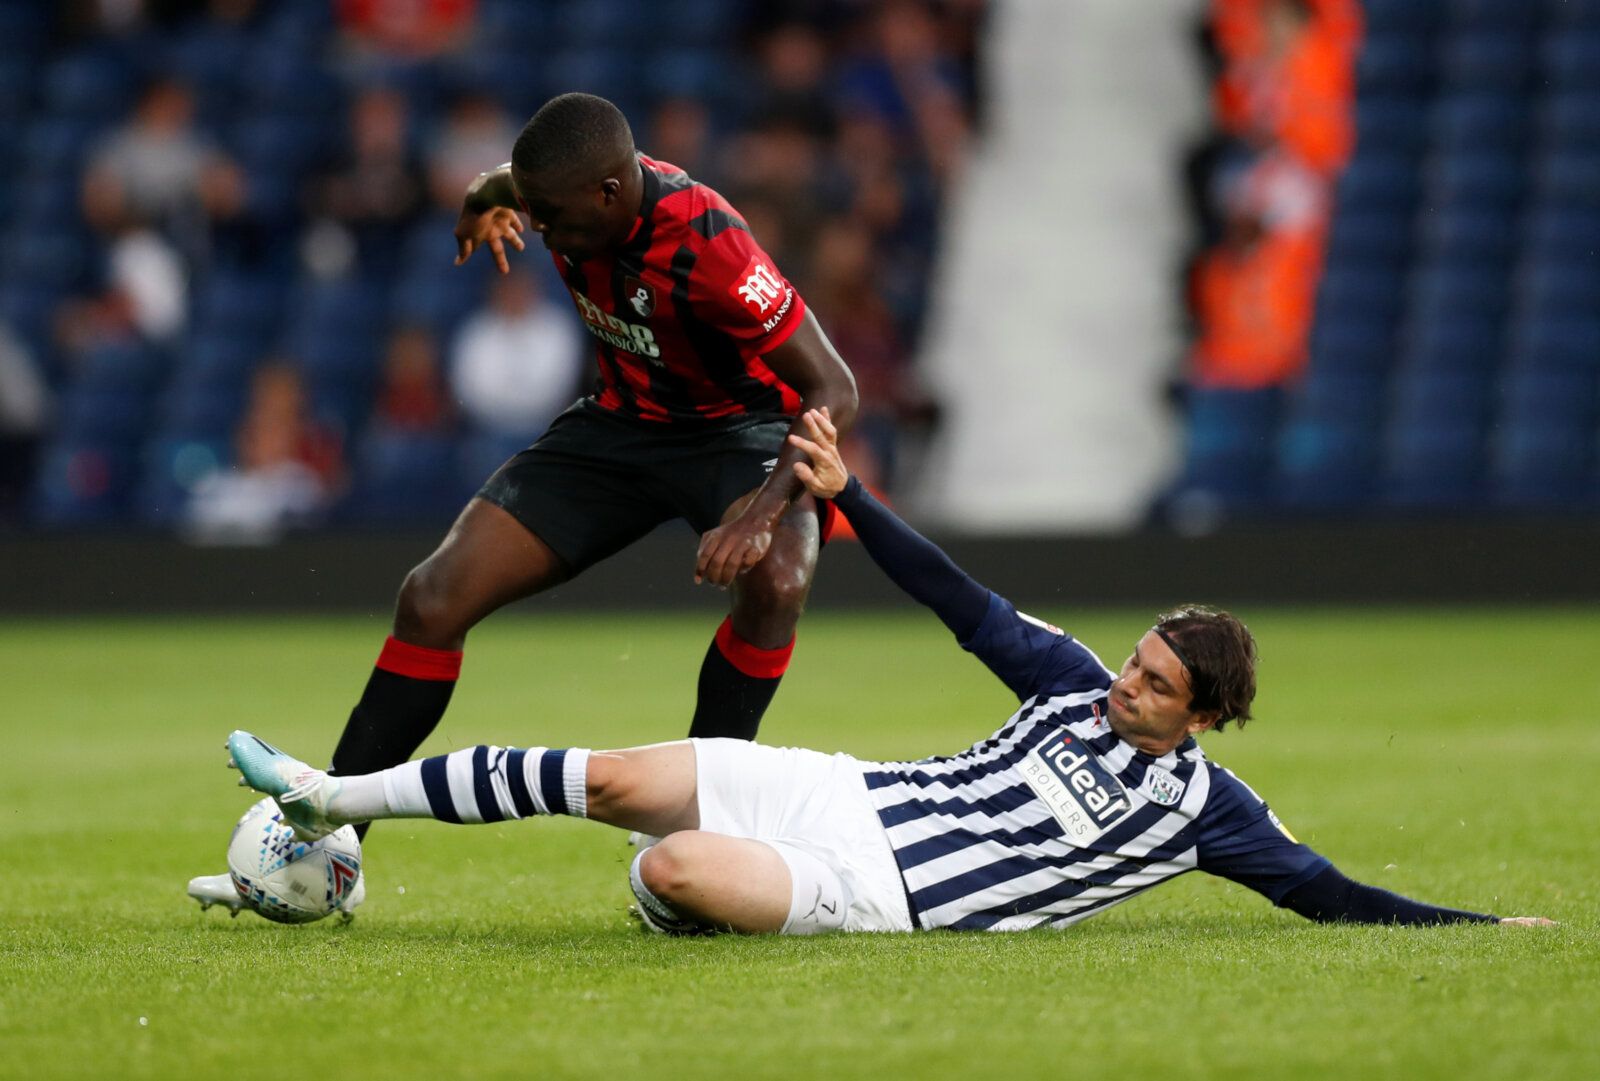 Soccer Football - Pre Season Friendly - West Bromwich Albion v AFC Bournemouth - The Hawthorns, West Bromwich, Britain - July 26, 2019   West Brom's Filip Krovinovic in action with AFC Bournemouth's Nnamdi Ofoborh   Action Images via Reuters/Matthew Childs